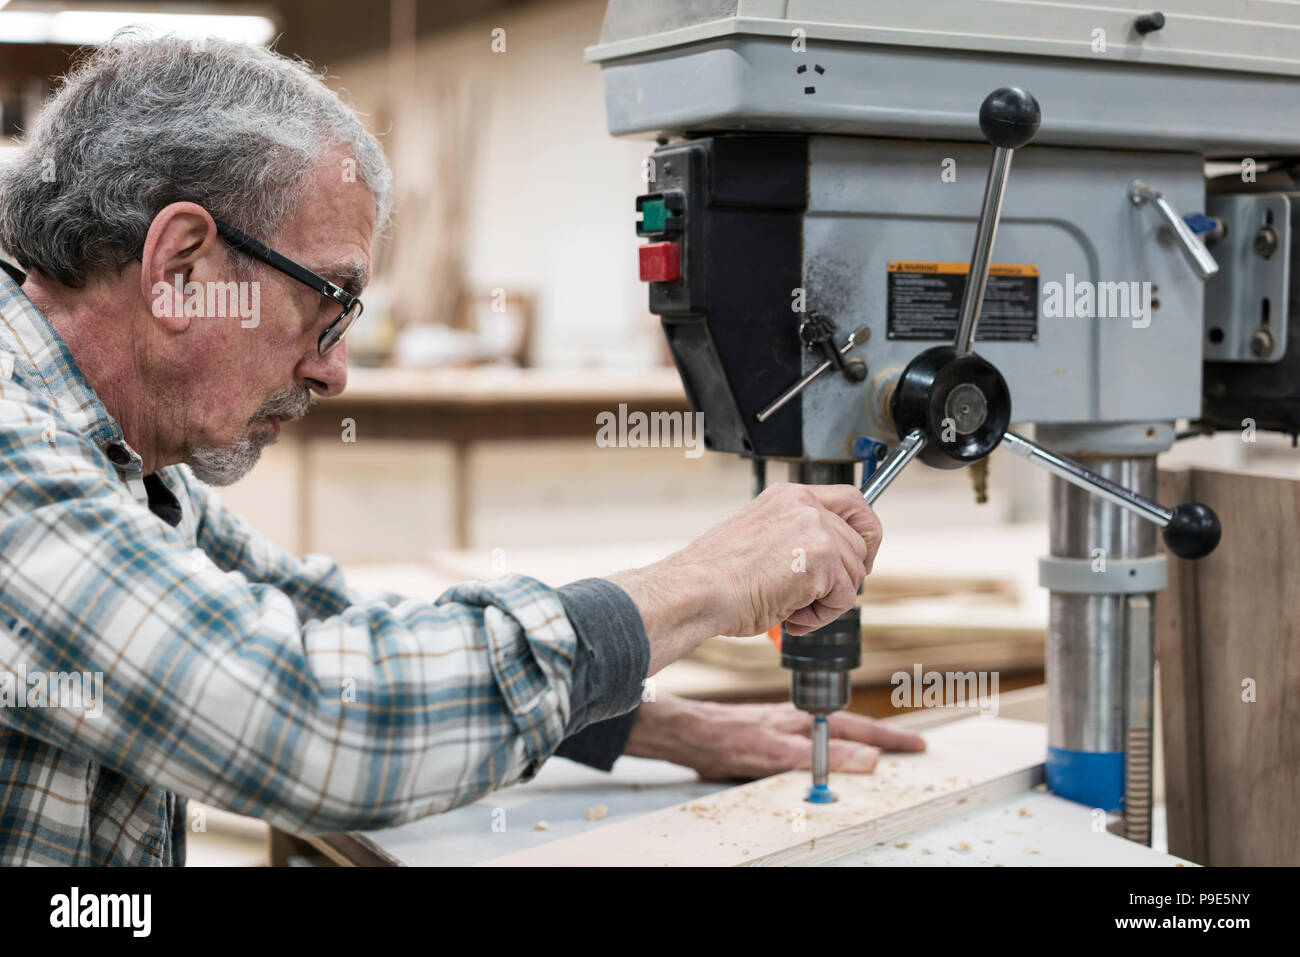 A senior man with glasses and beard in a woodworkers shop, using a machine. Stock Photo